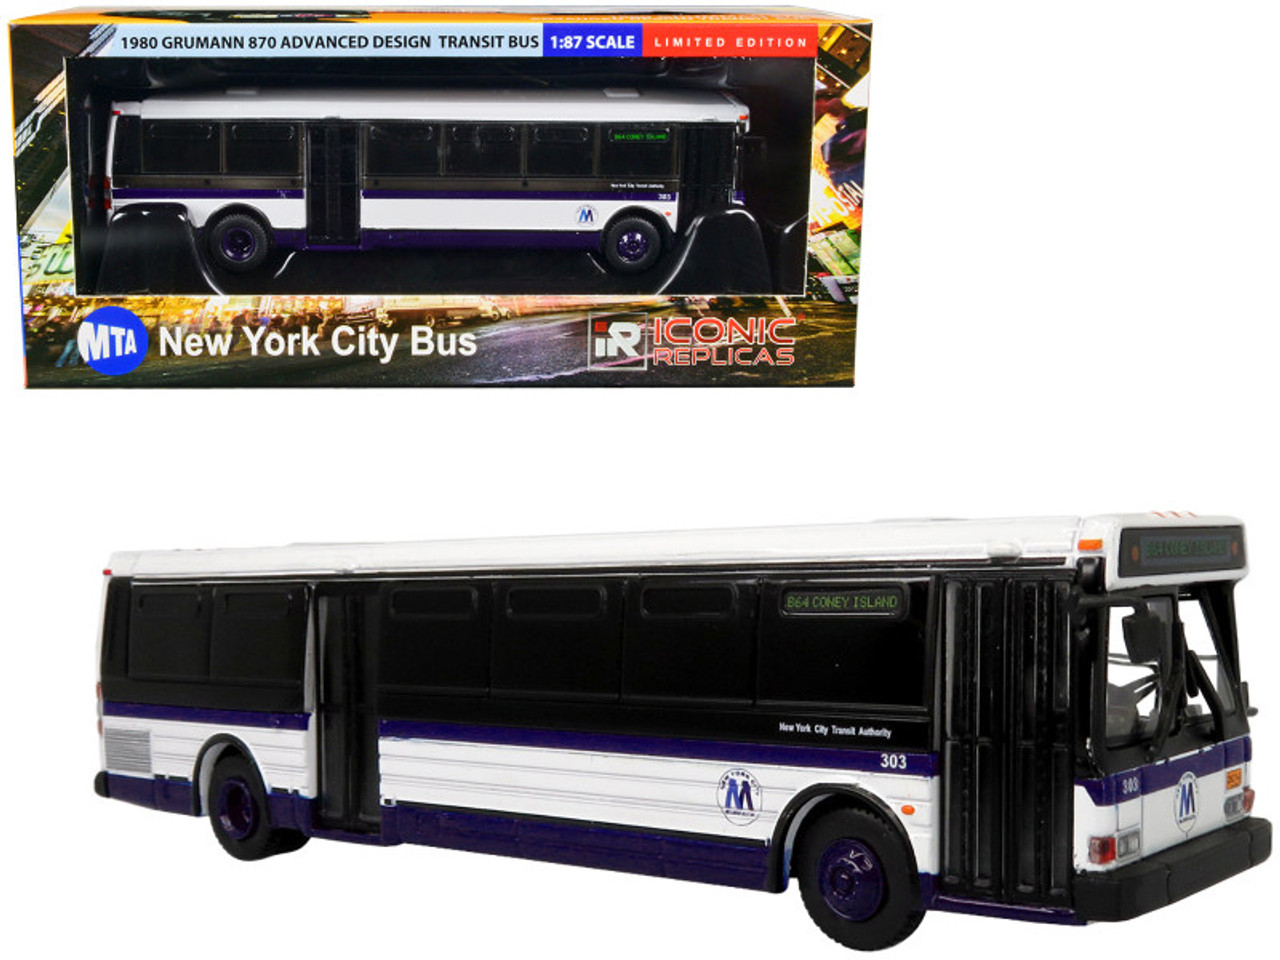 Transit Buses and Motorcoaches